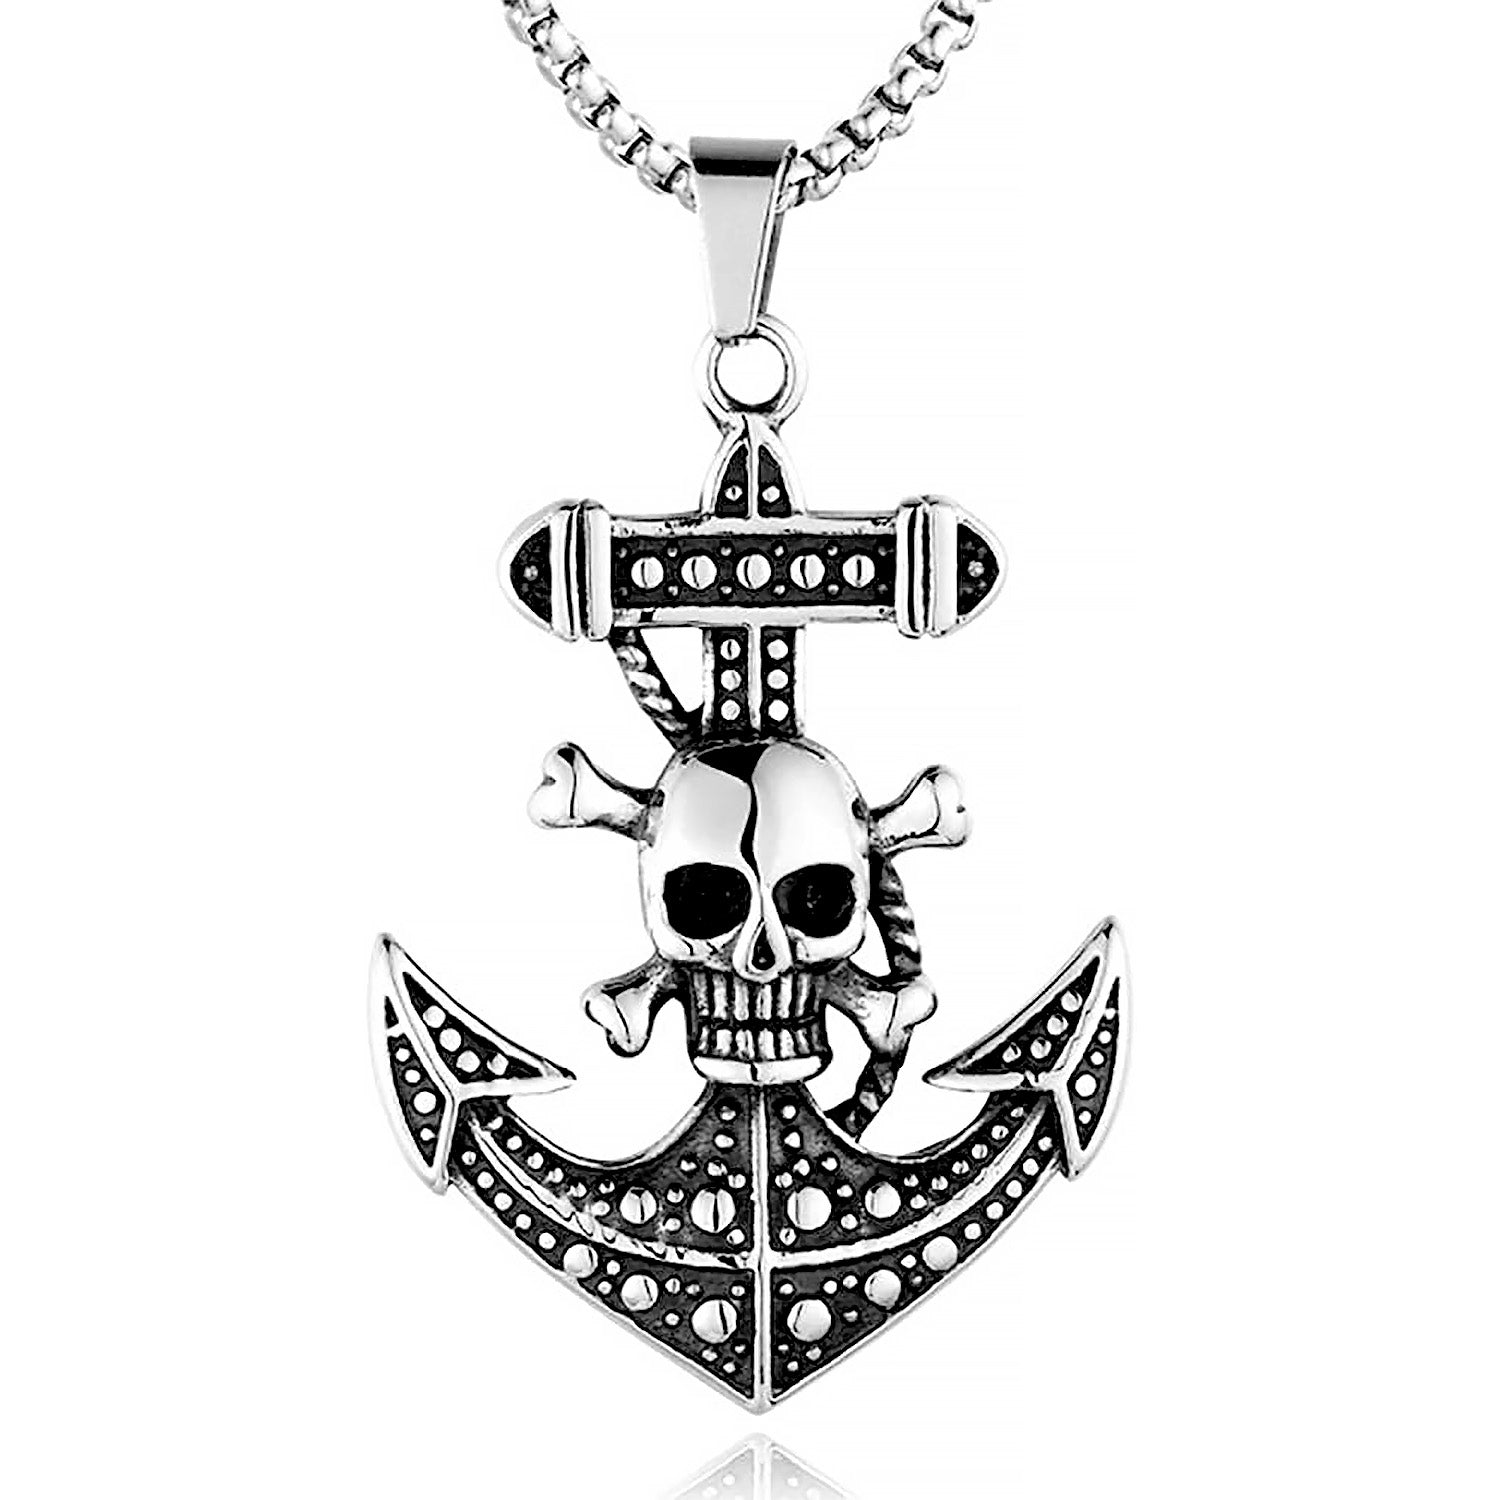 Stainless Steel Pirate Skull Anchor Necklace Pendant